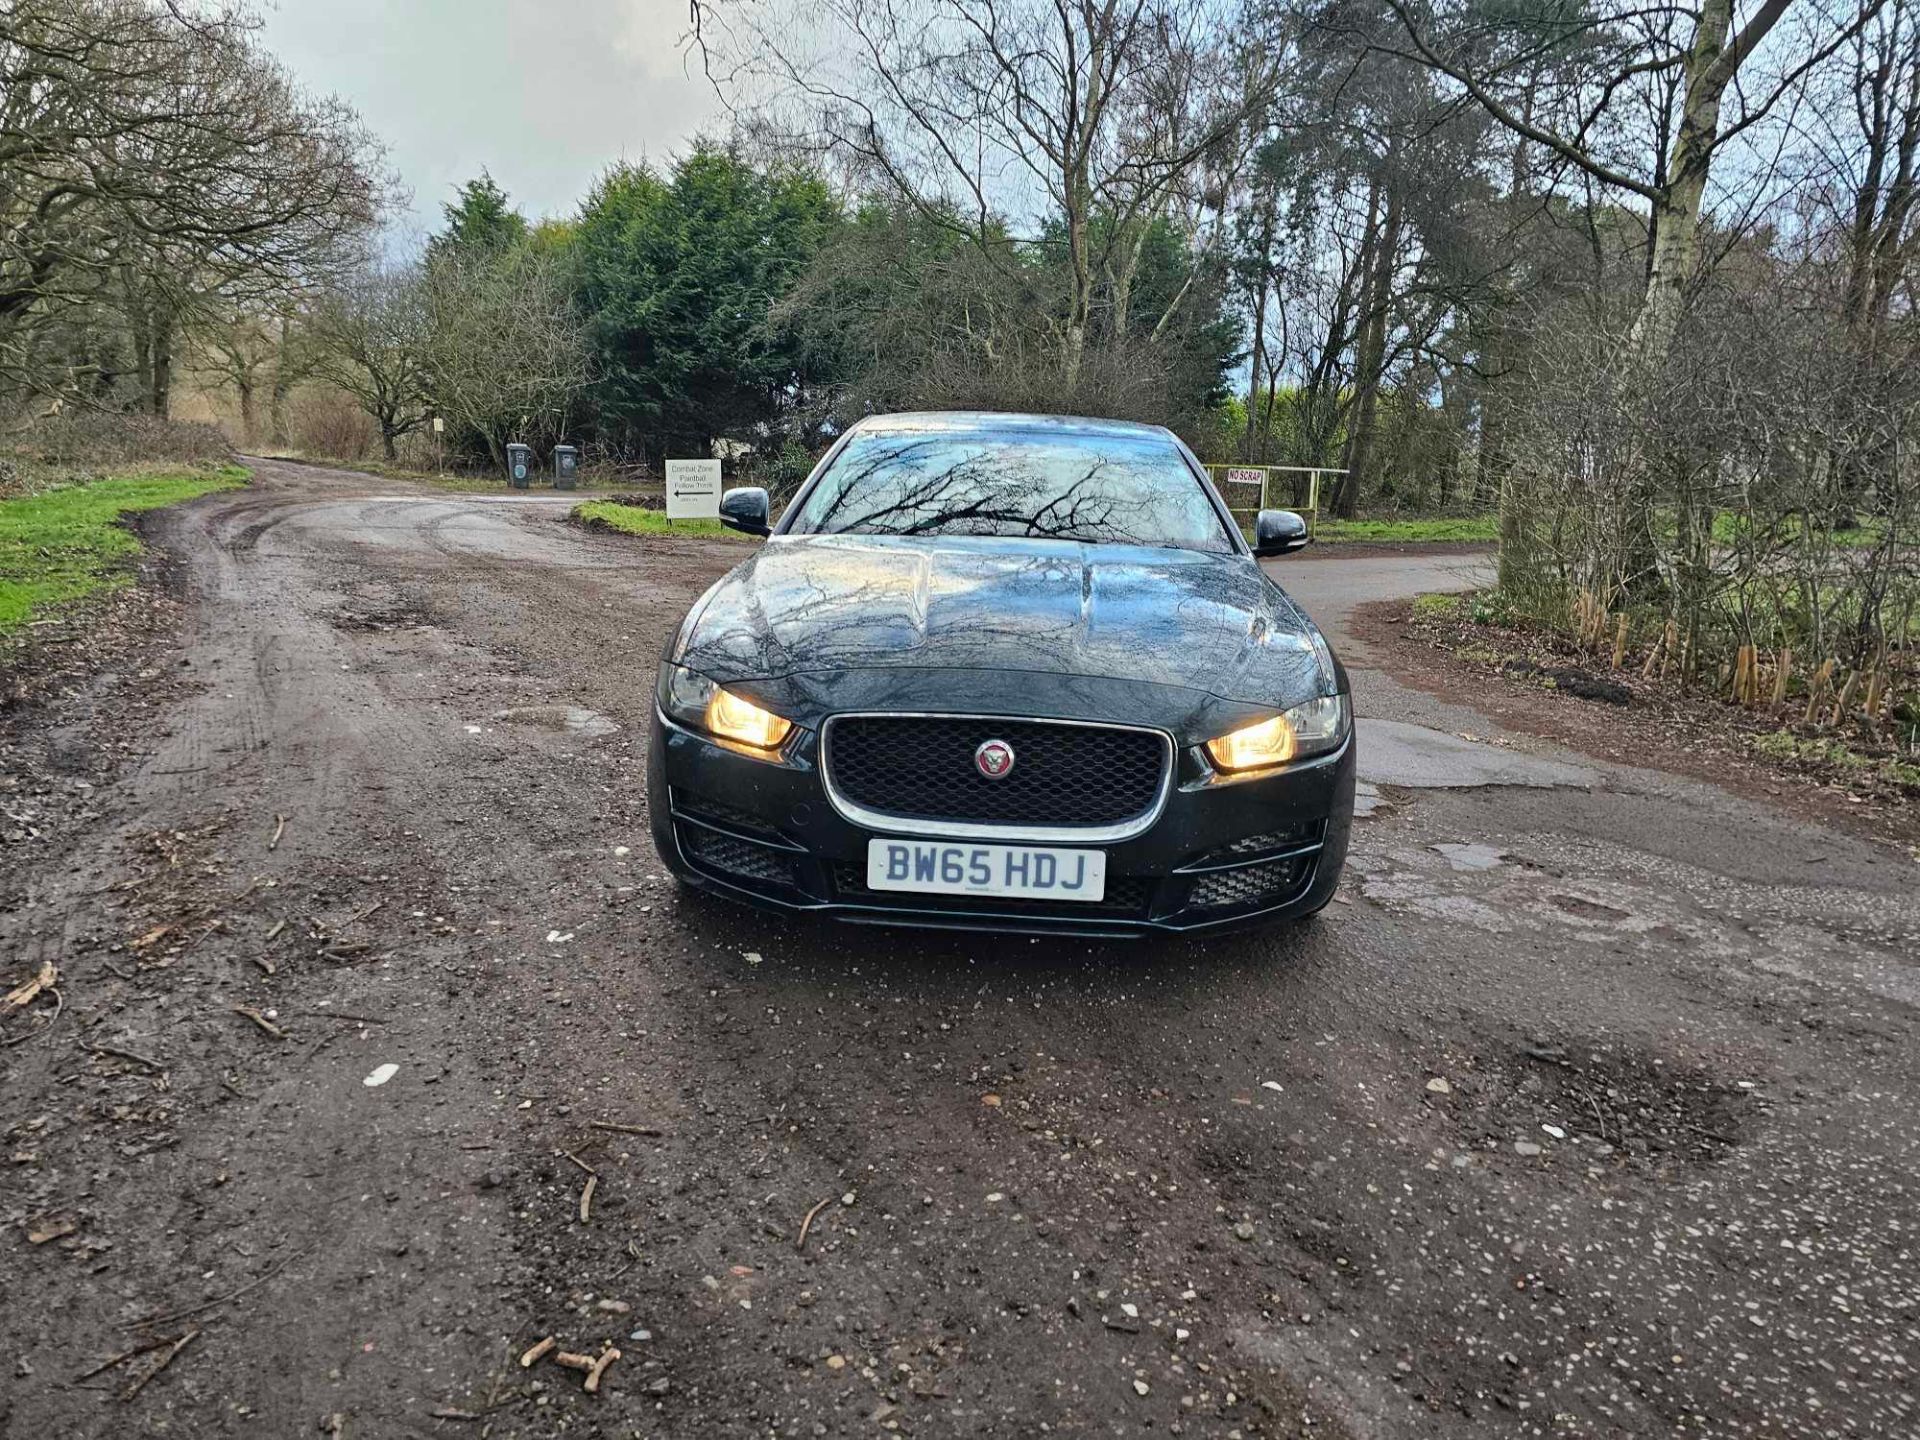 2015 65 JAGUAR XE SALOON - STARTS AND DRIVES BUT ENGINE IS NOISY - ALLOY WHEELS - 5 SERVICES  - Image 9 of 10